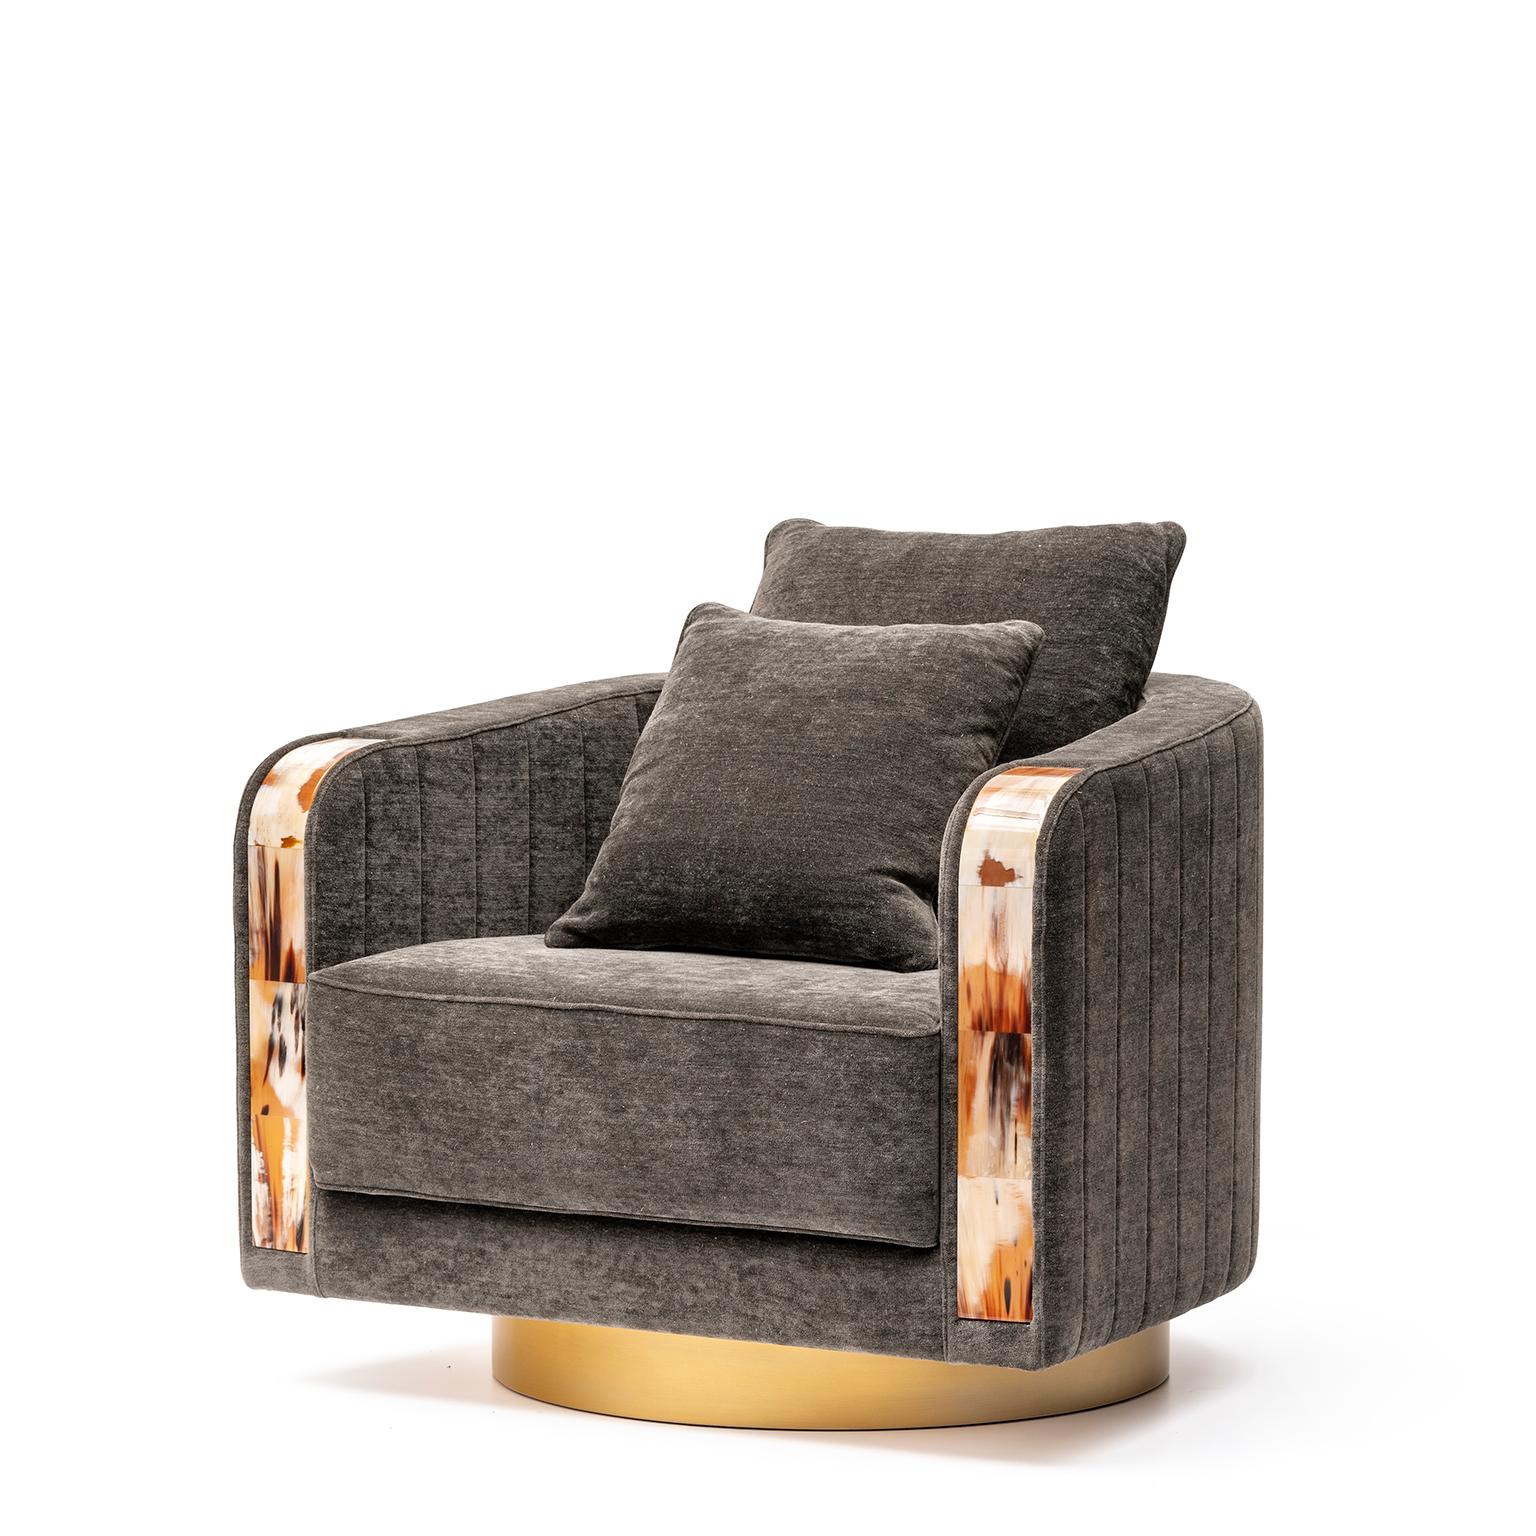 With its curvilinear forms, thoughtful detailing and prized materials, Afrodite swivel armchair offers the ultimate in style and function. Featuring ribbed sides and back, the armchair is upholstered in Cortina fabric (cat. B), Ardoise color, a soft